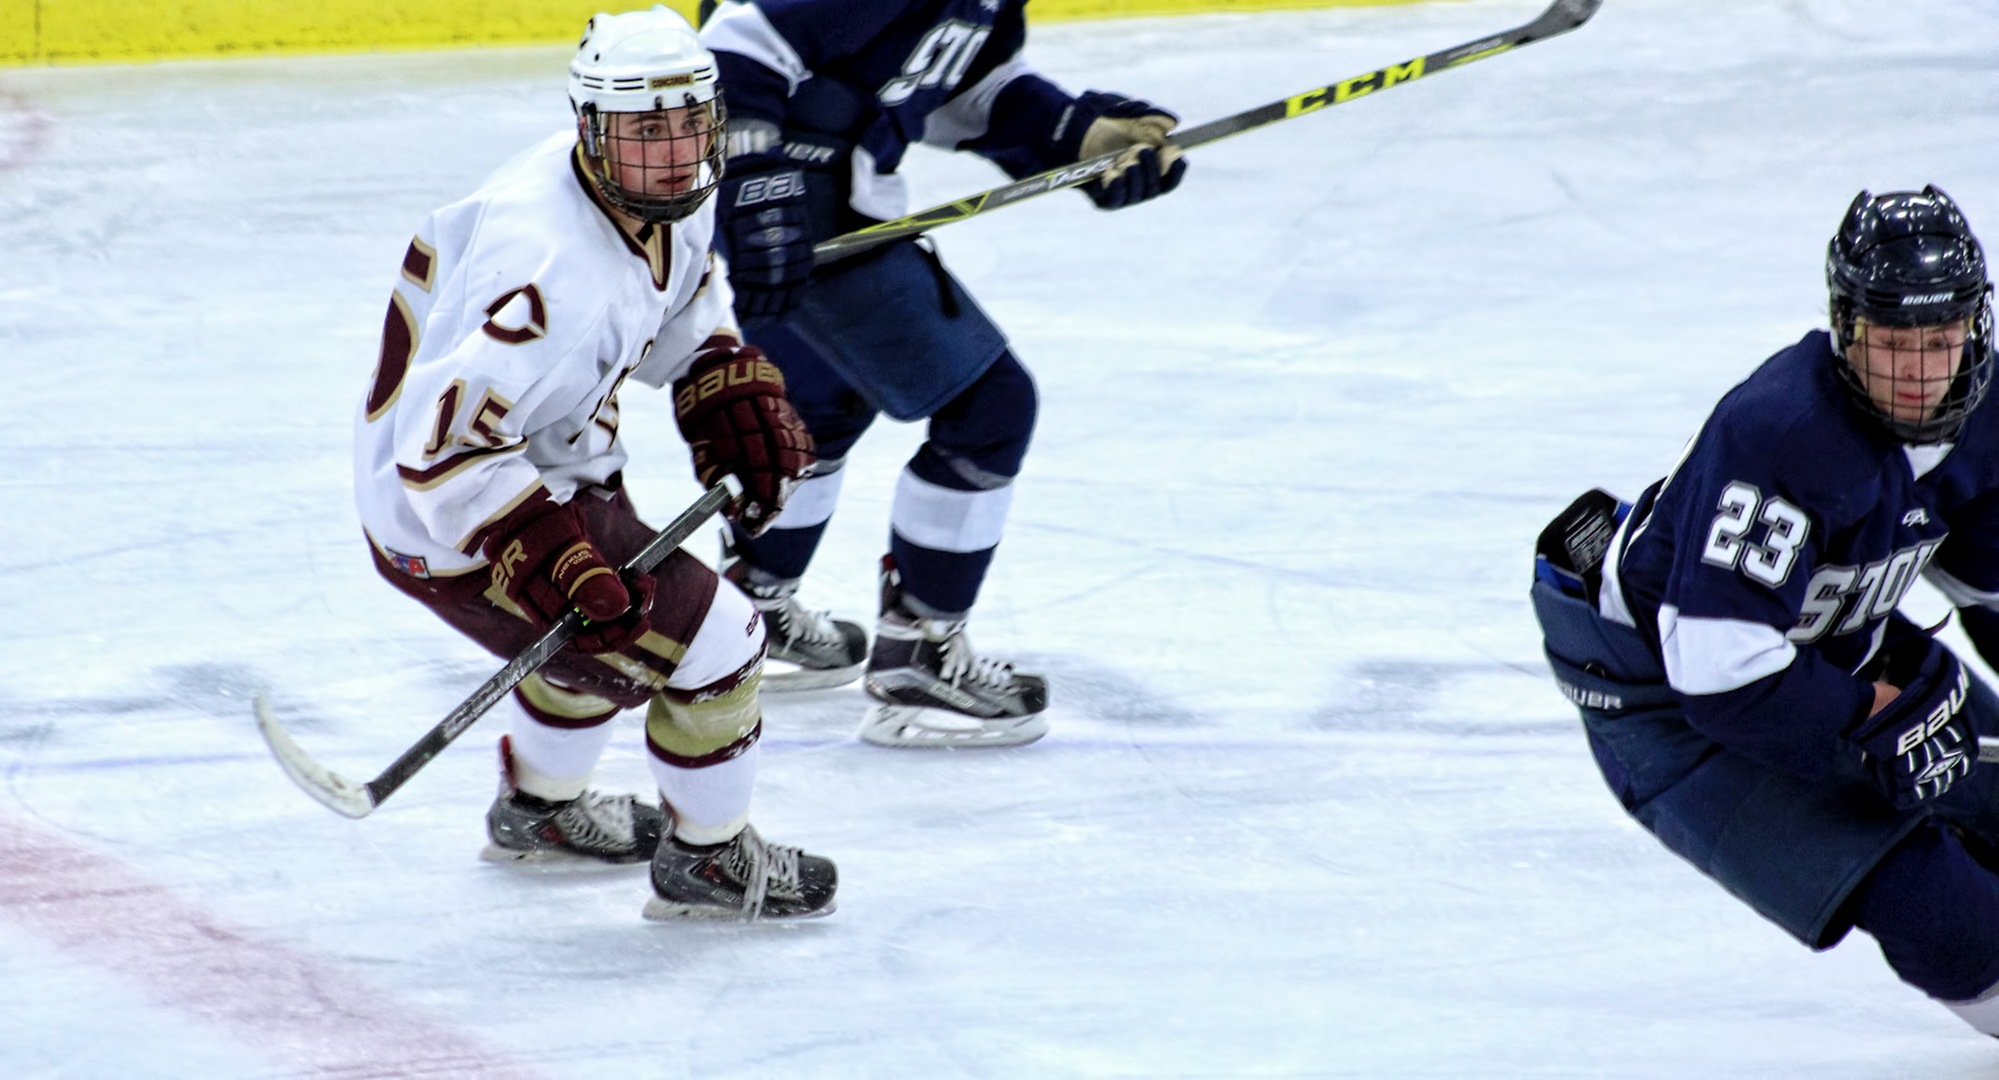 Junior Mario Bianchi scored the game-winning goal in the Cobbers' 3-2 victory at Wis.-Stout.